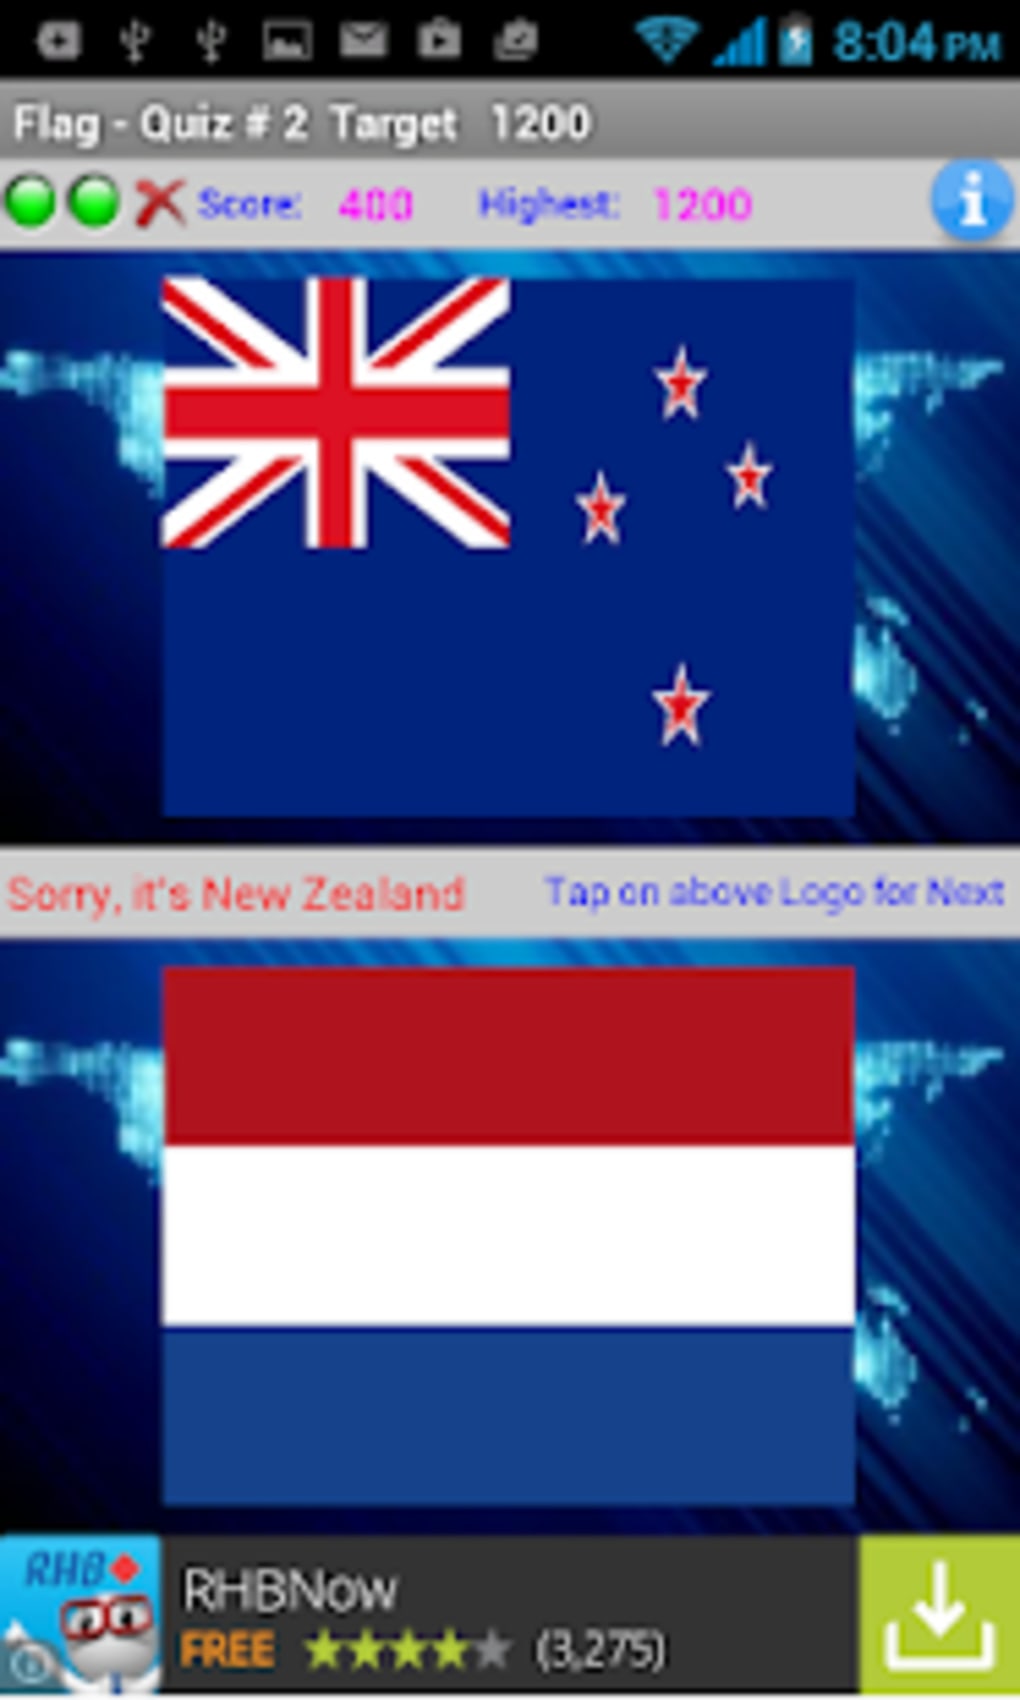 Country Flag Quiz APK for Android Download